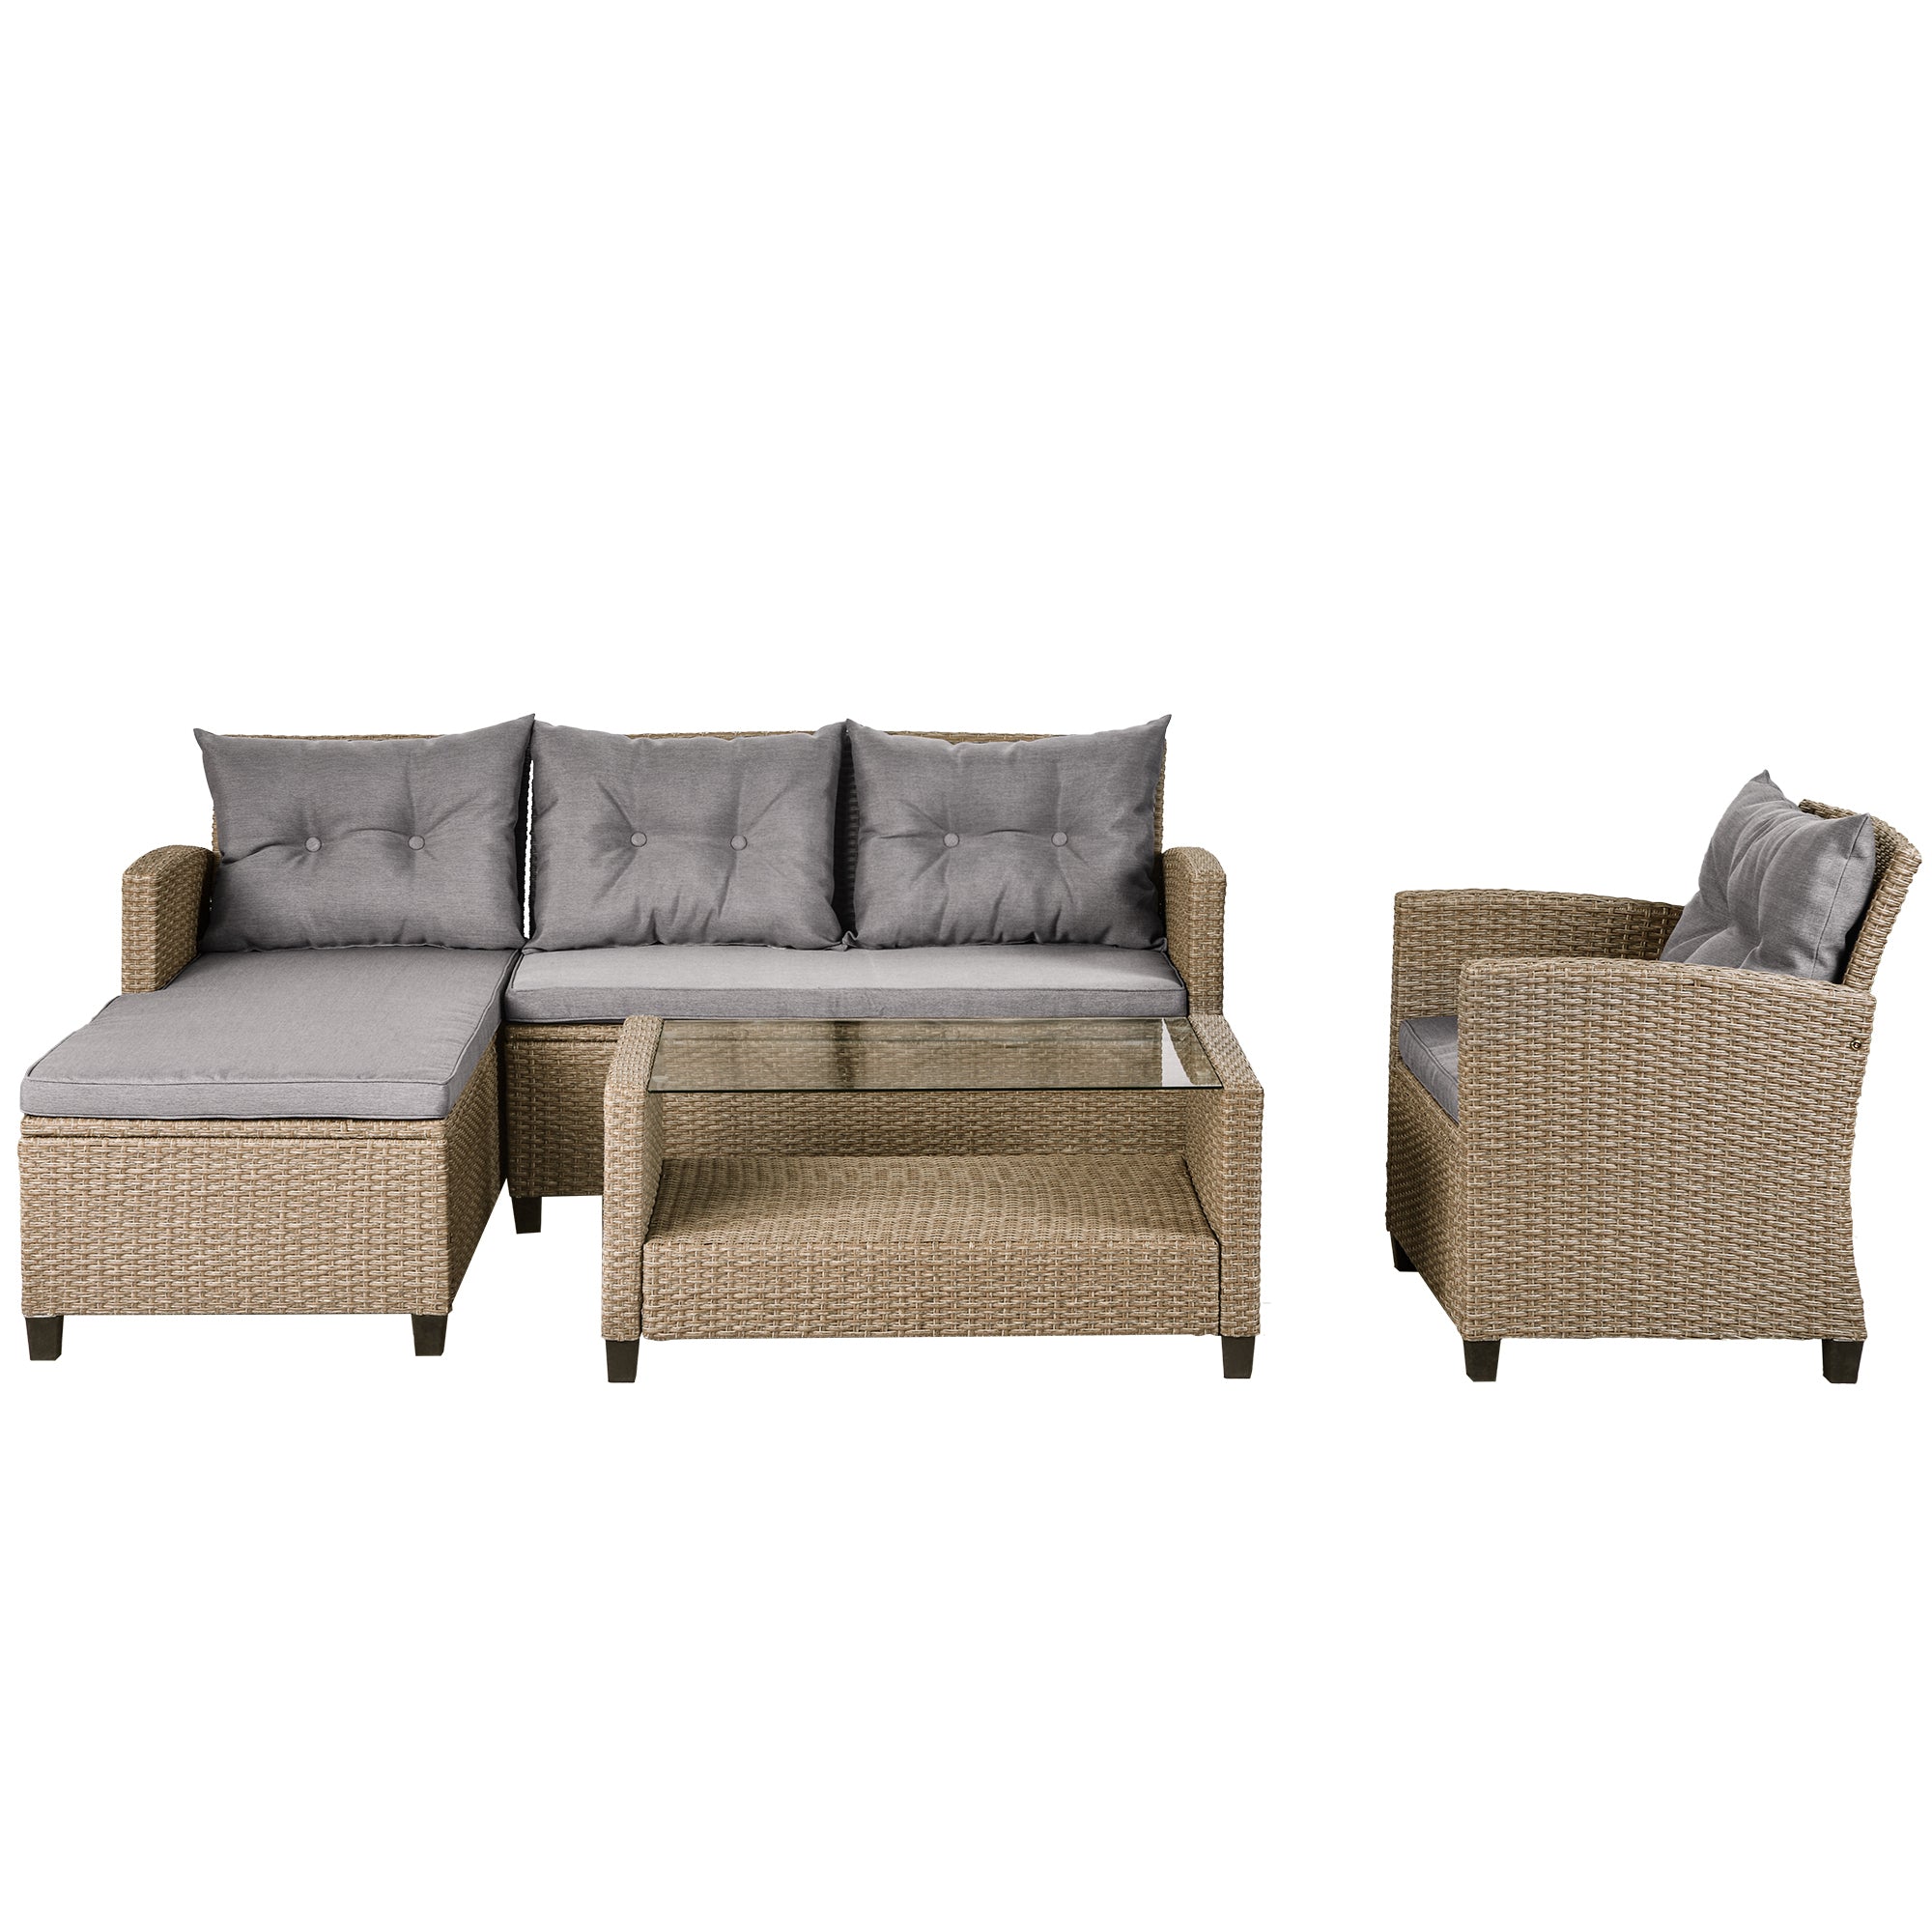 U-Style Outdoor Patio Furniture Sets: 4-Piece Conversation Set Wicker Rattan Sectional Sofa with Seat Cushions in Beige Brown | Ideal for Your Outdoor Space